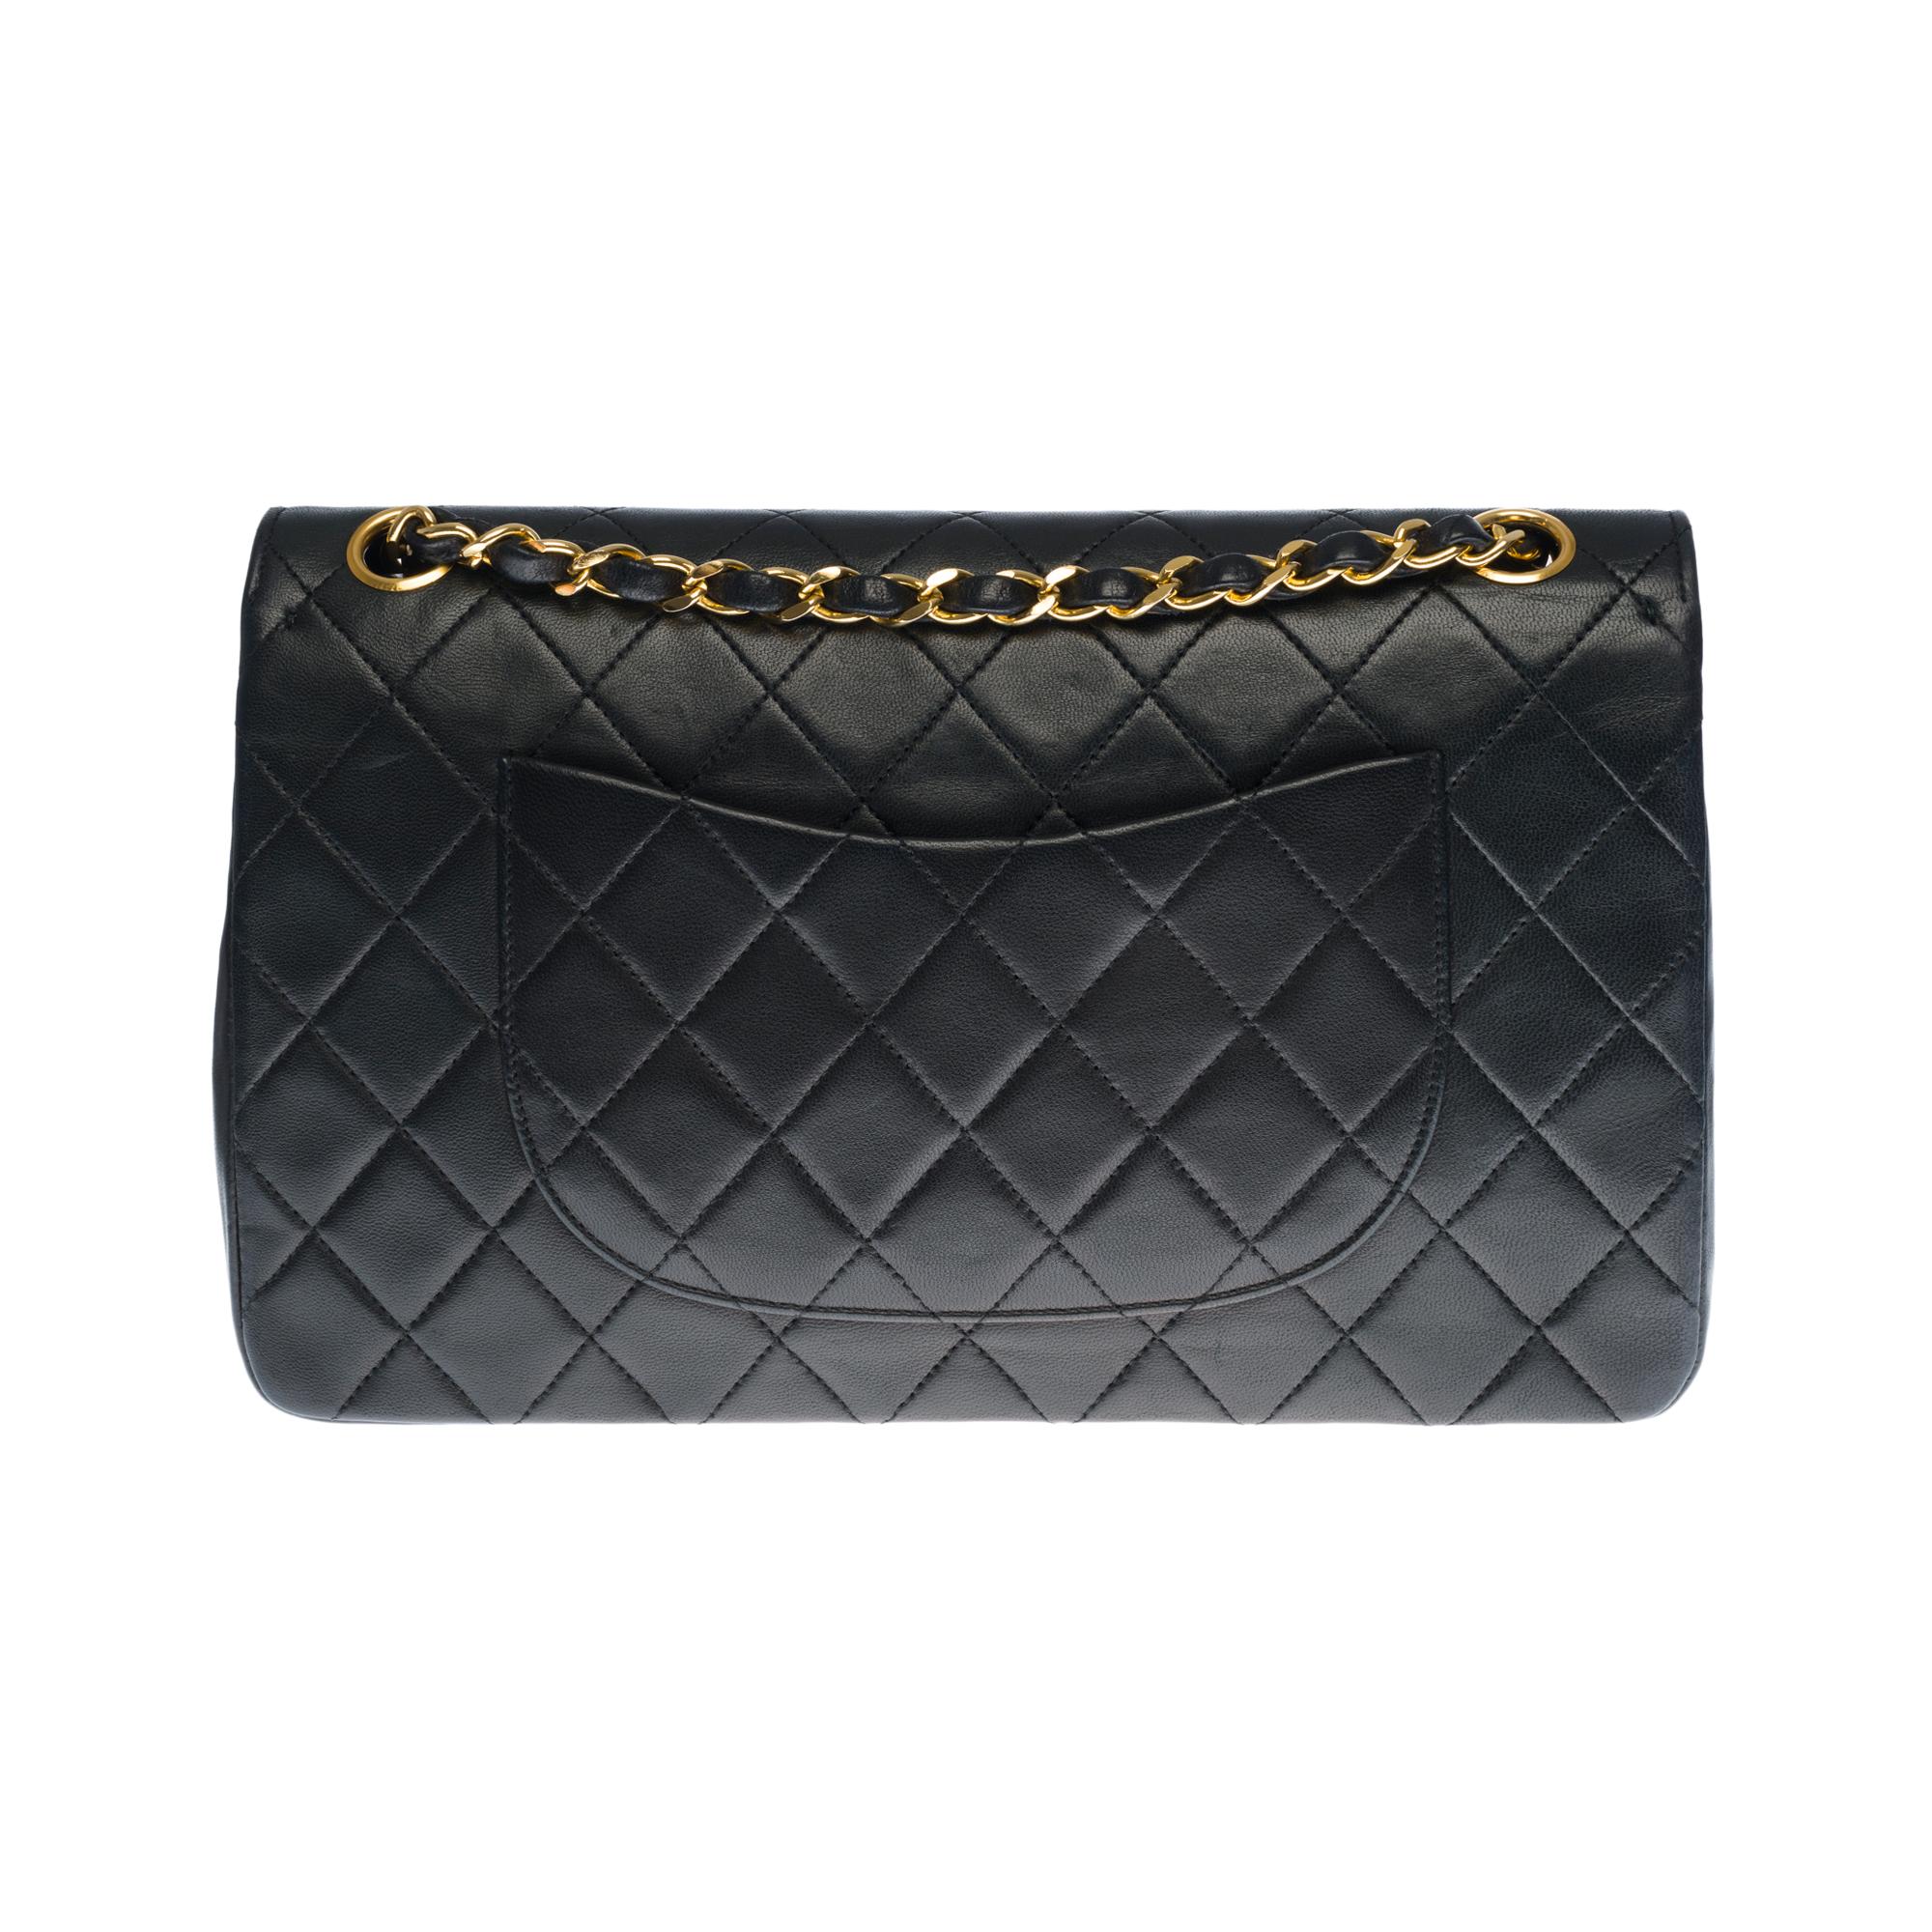 Beautiful Chanel Timeless Medium double flap shoulder bag in black quilted lambskin leather, gold-tone metal hardware, a gold-tone metal chain handle interwoven with black leather allowing a hand or shoulder carry
Closure with gold metal flap
A